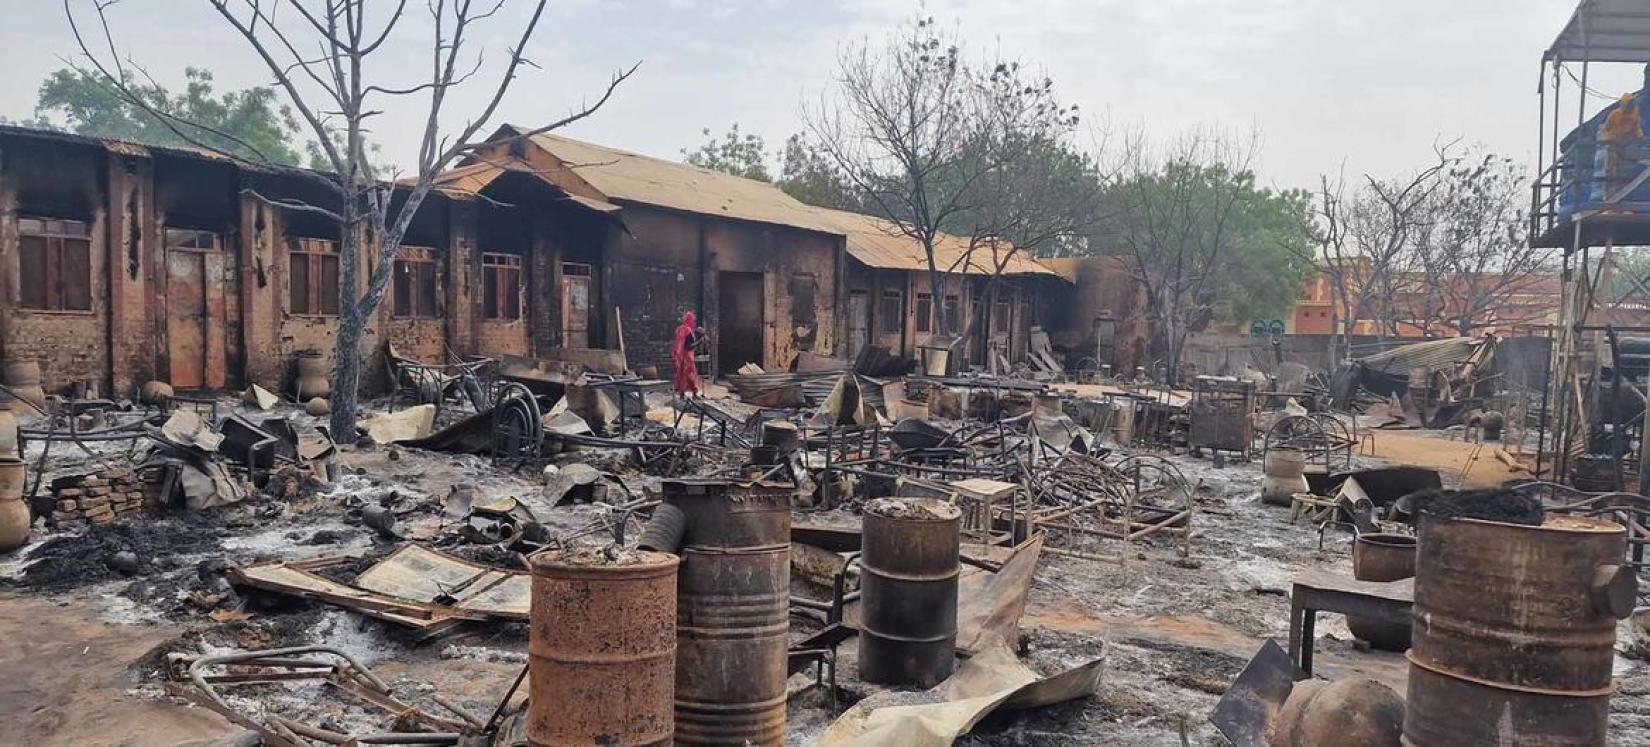 On April 27, 2023, the Al-Imam Al-Kadhim School in Al-Geneina City, West Darfur State, which had been serving as an Internally Displaced Persons (IDP) shelter, was burned to the ground amidst the ongoing crisis in Sudan.